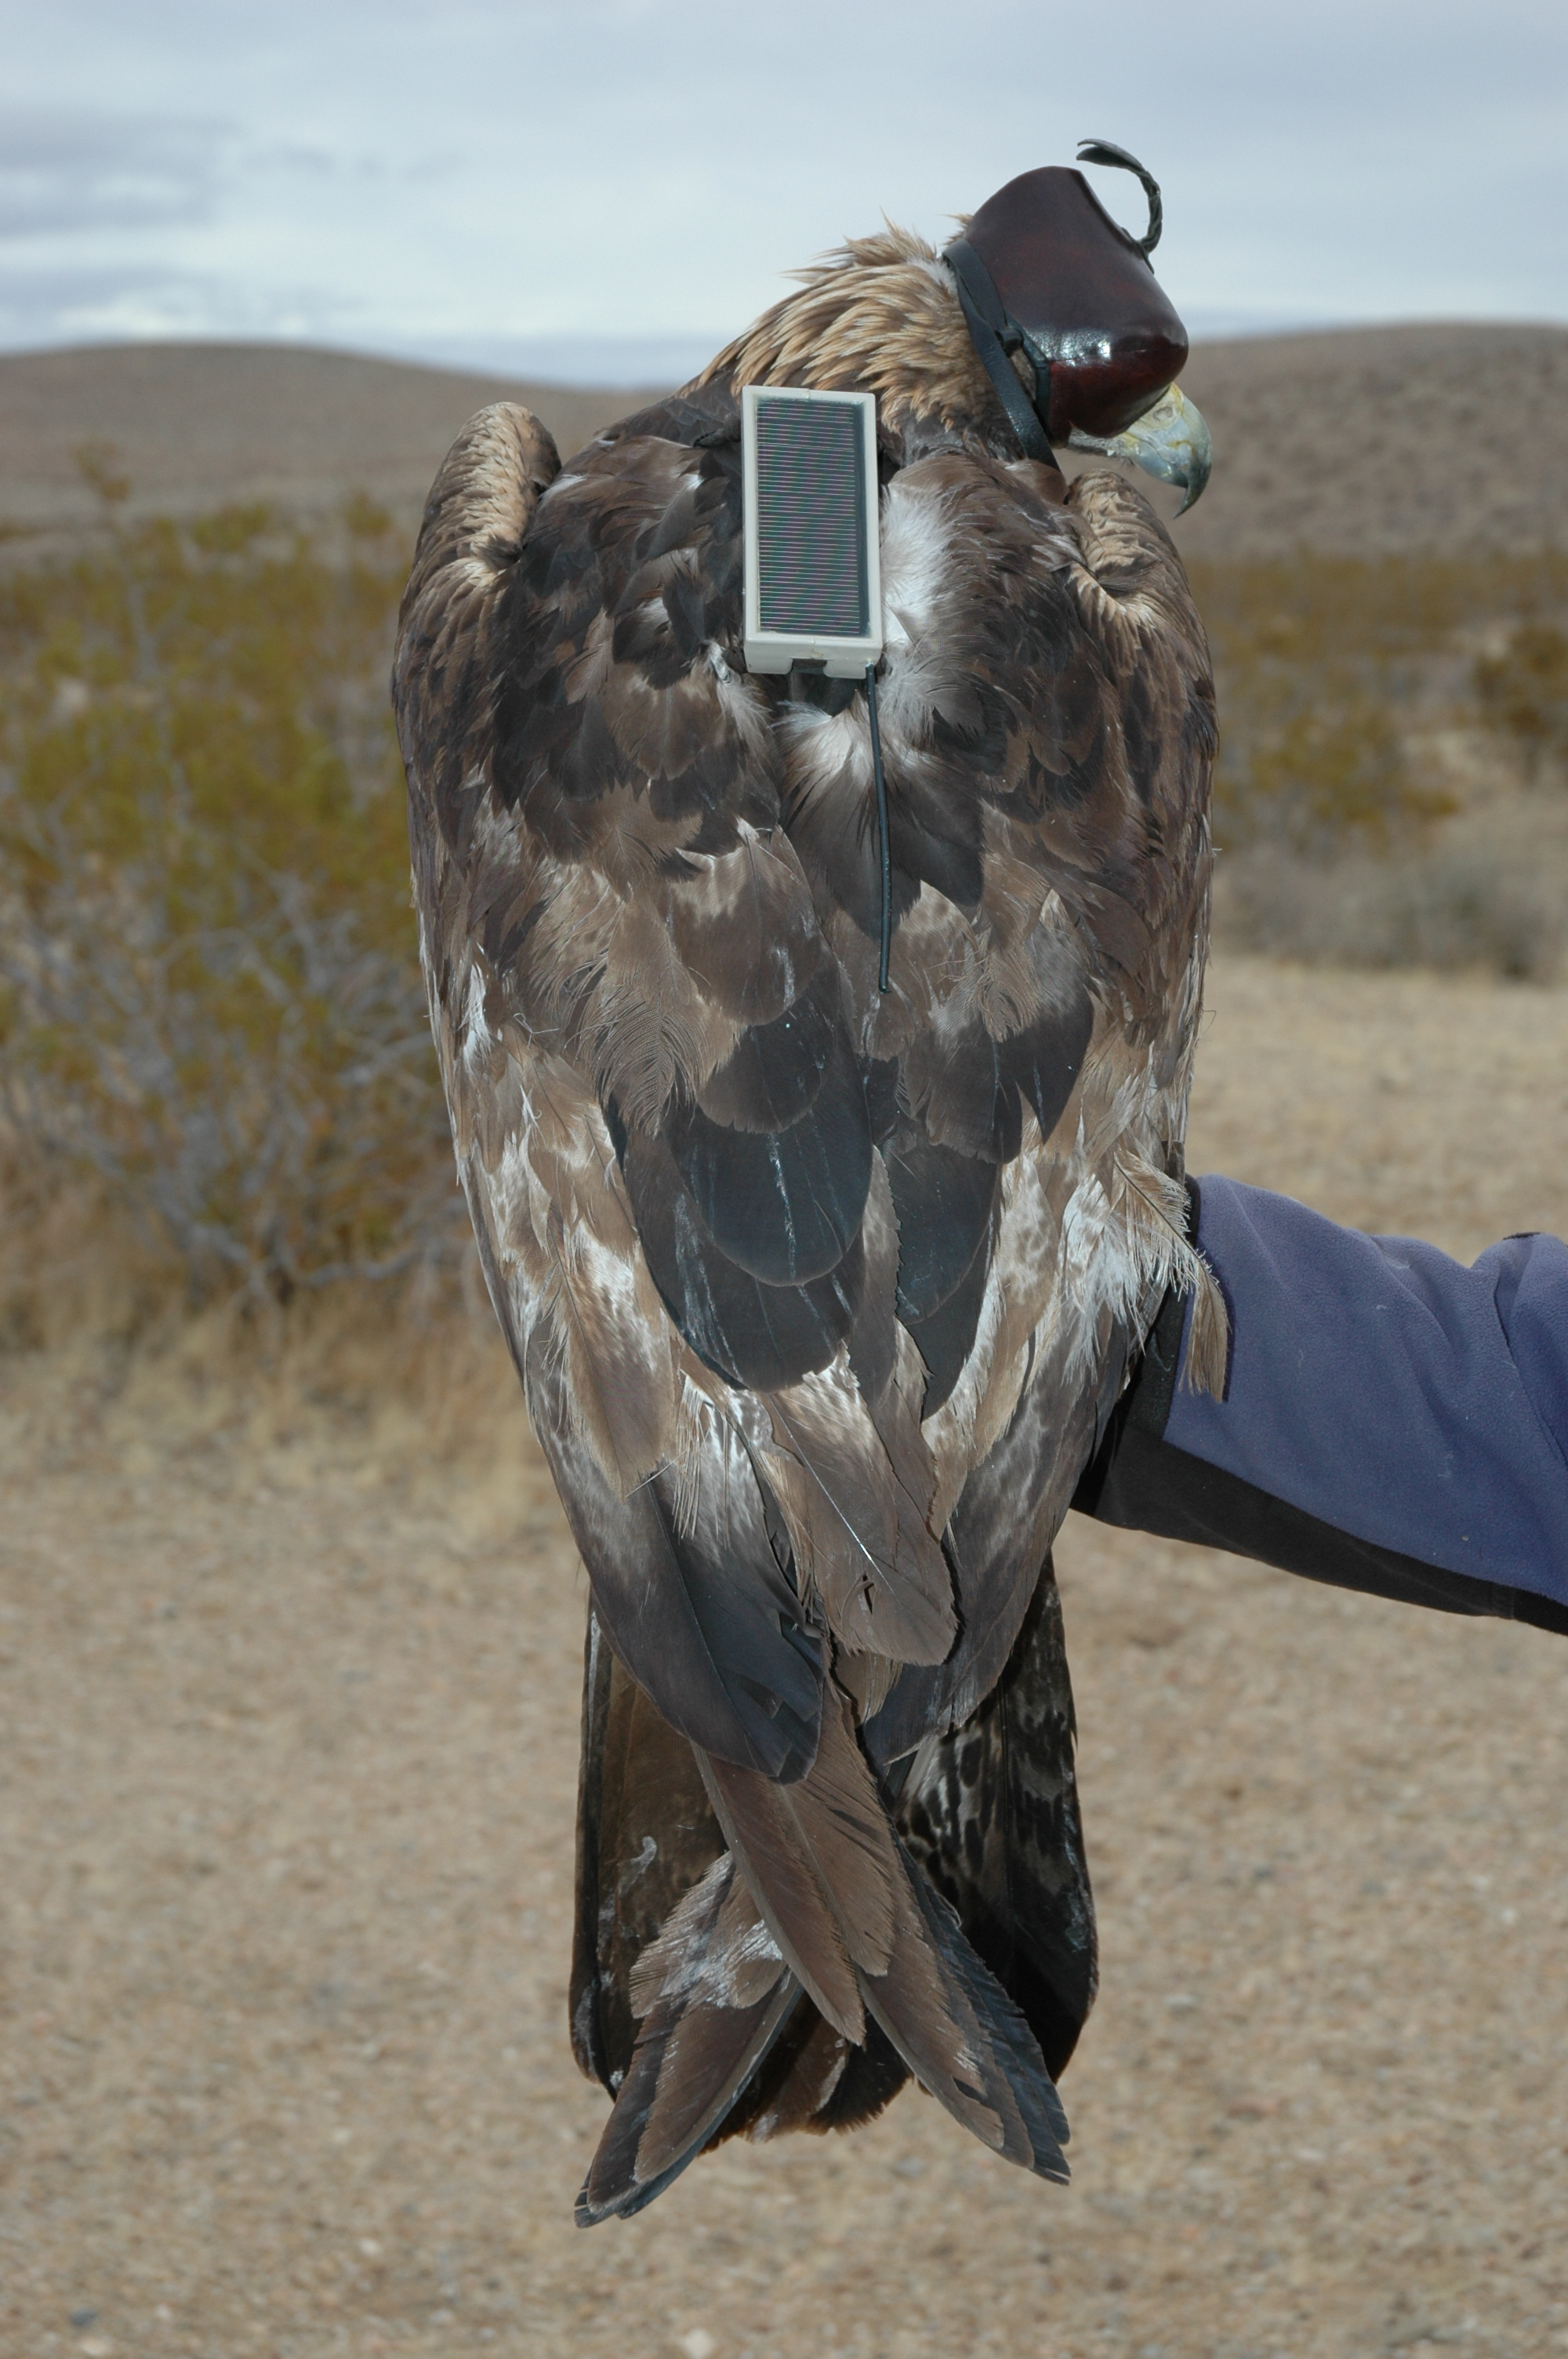 Female golden eagle with GPS-GSM transmitter. From 2012 to 2013, telemetry data were collected from nine eagles outfitted with a backpack holding a GPS-GSM telemetry system. The telemetry system recorded and stored a GPS location every 15 minutes and sent the locations via the GSM network or mobile phone, to a server once per day.